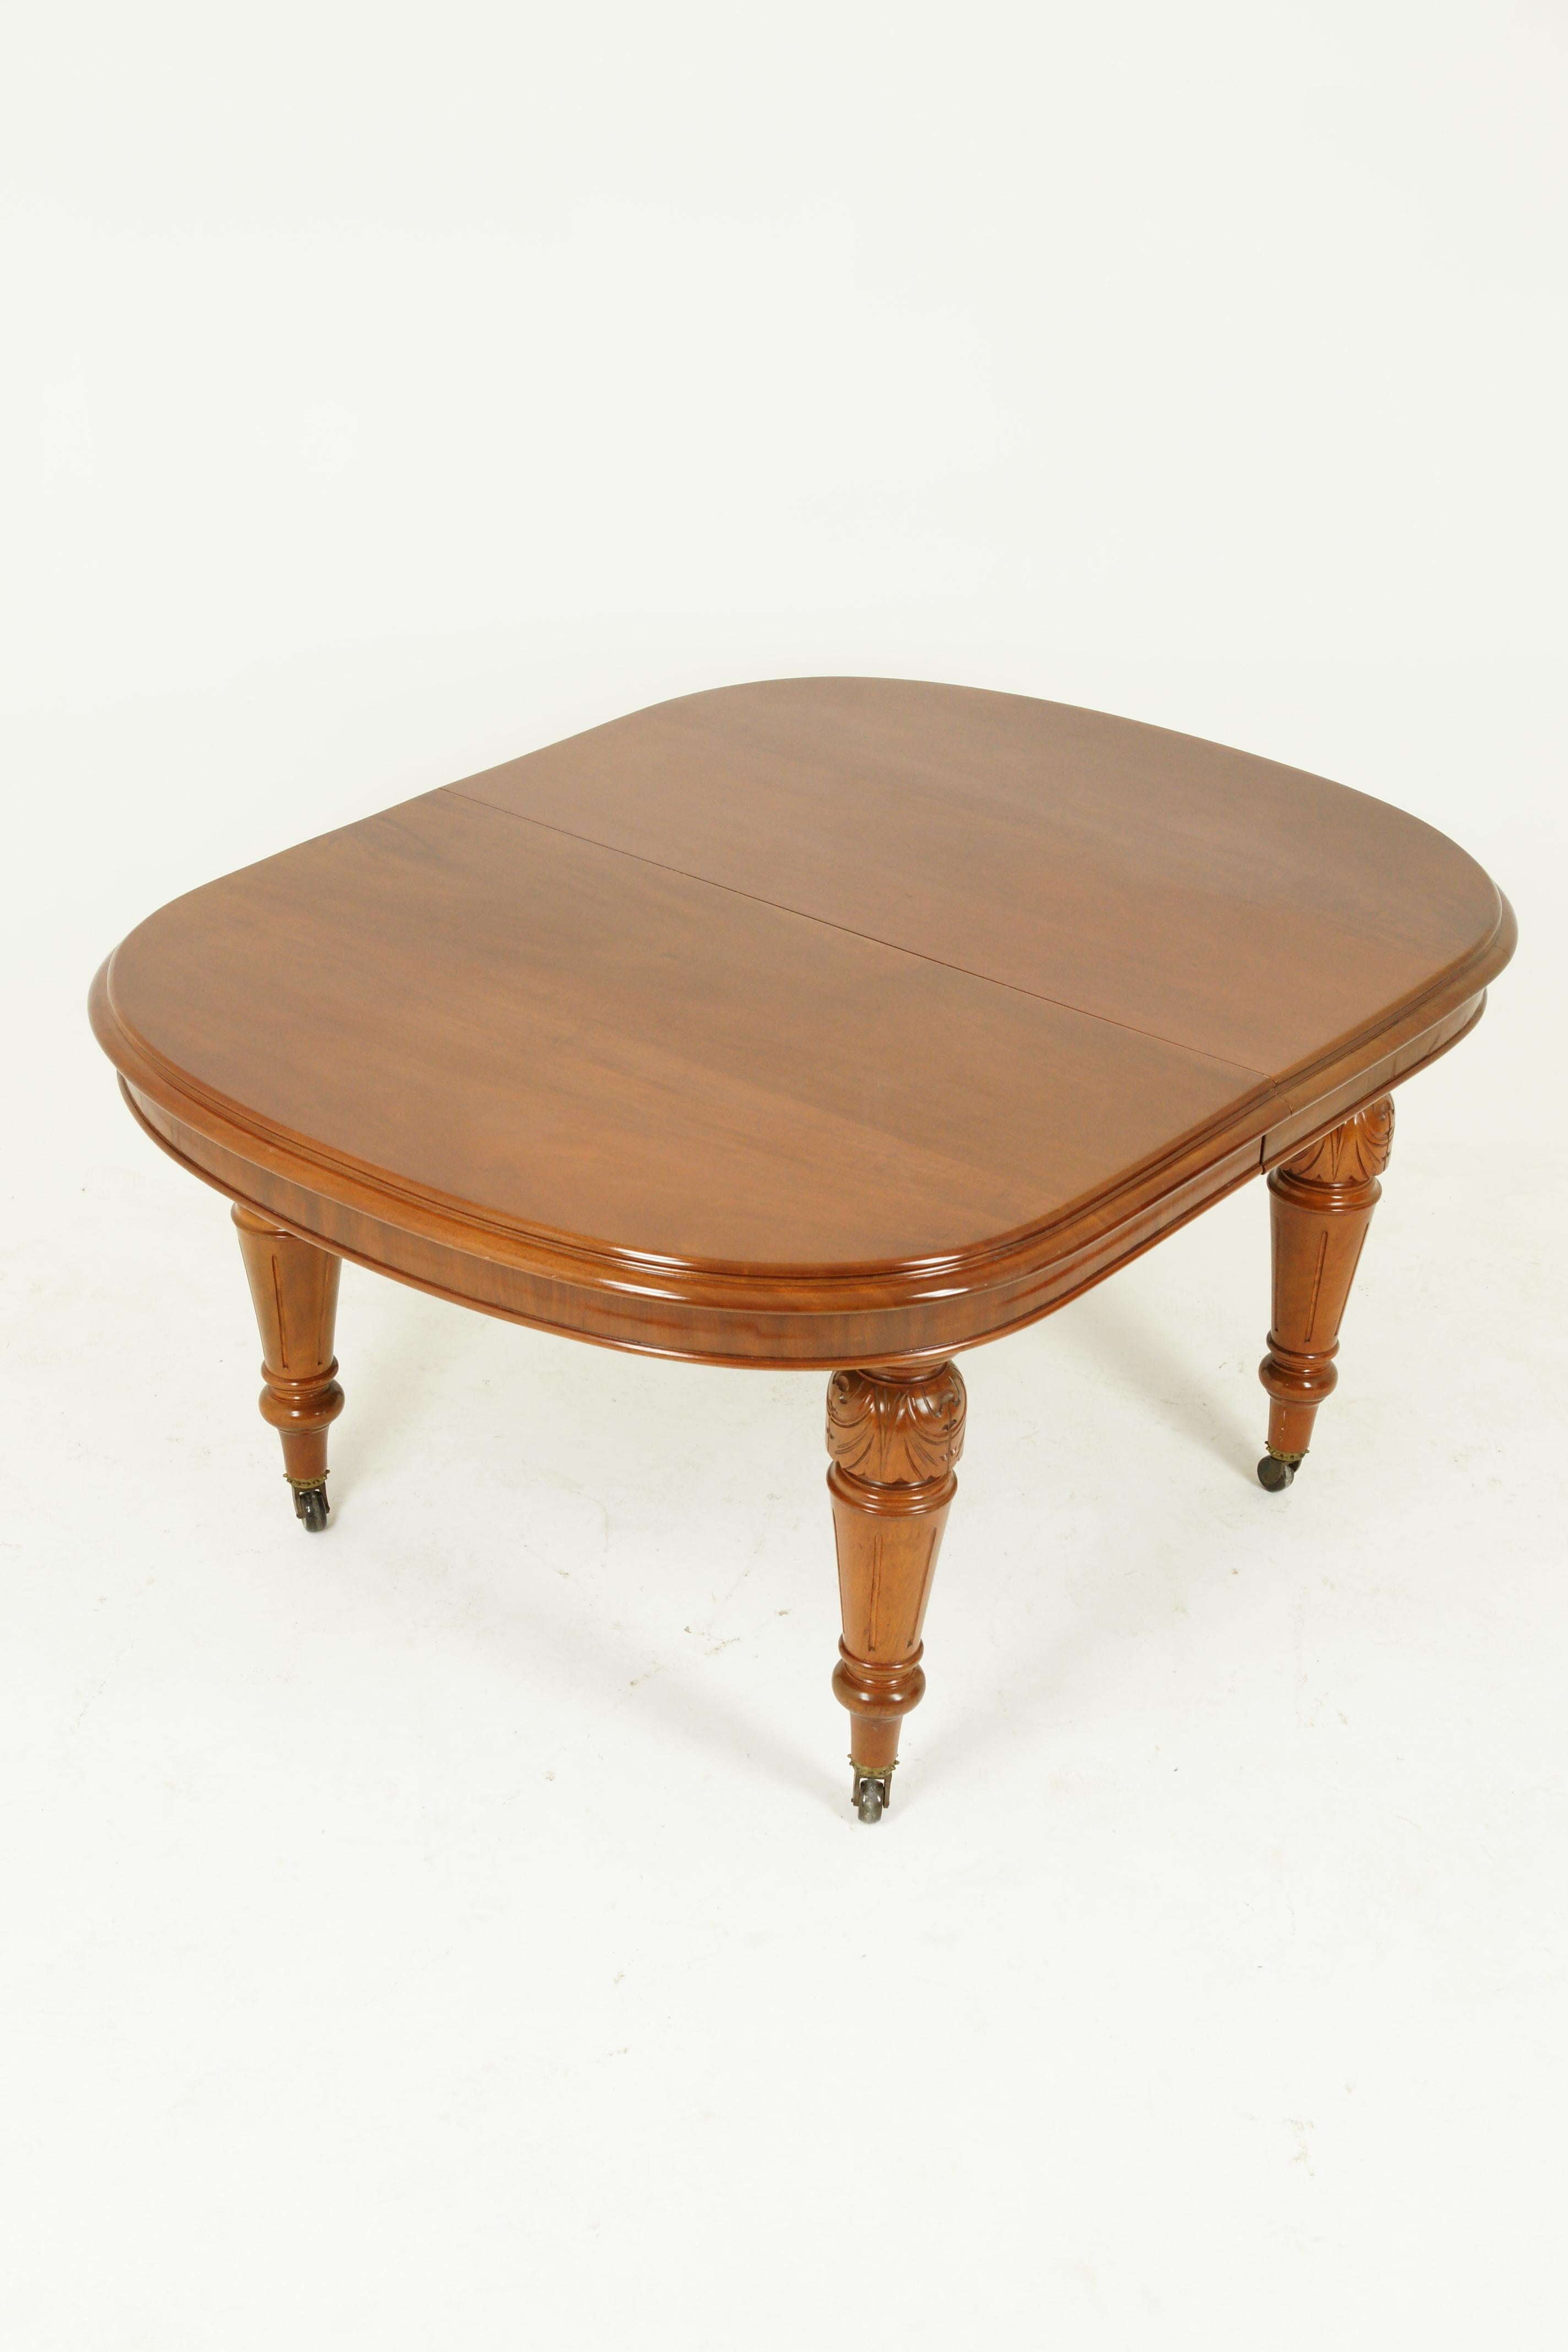 Late 19th Century Walnut Dining Table, Extendable Table, Victorian, Scotland 1880